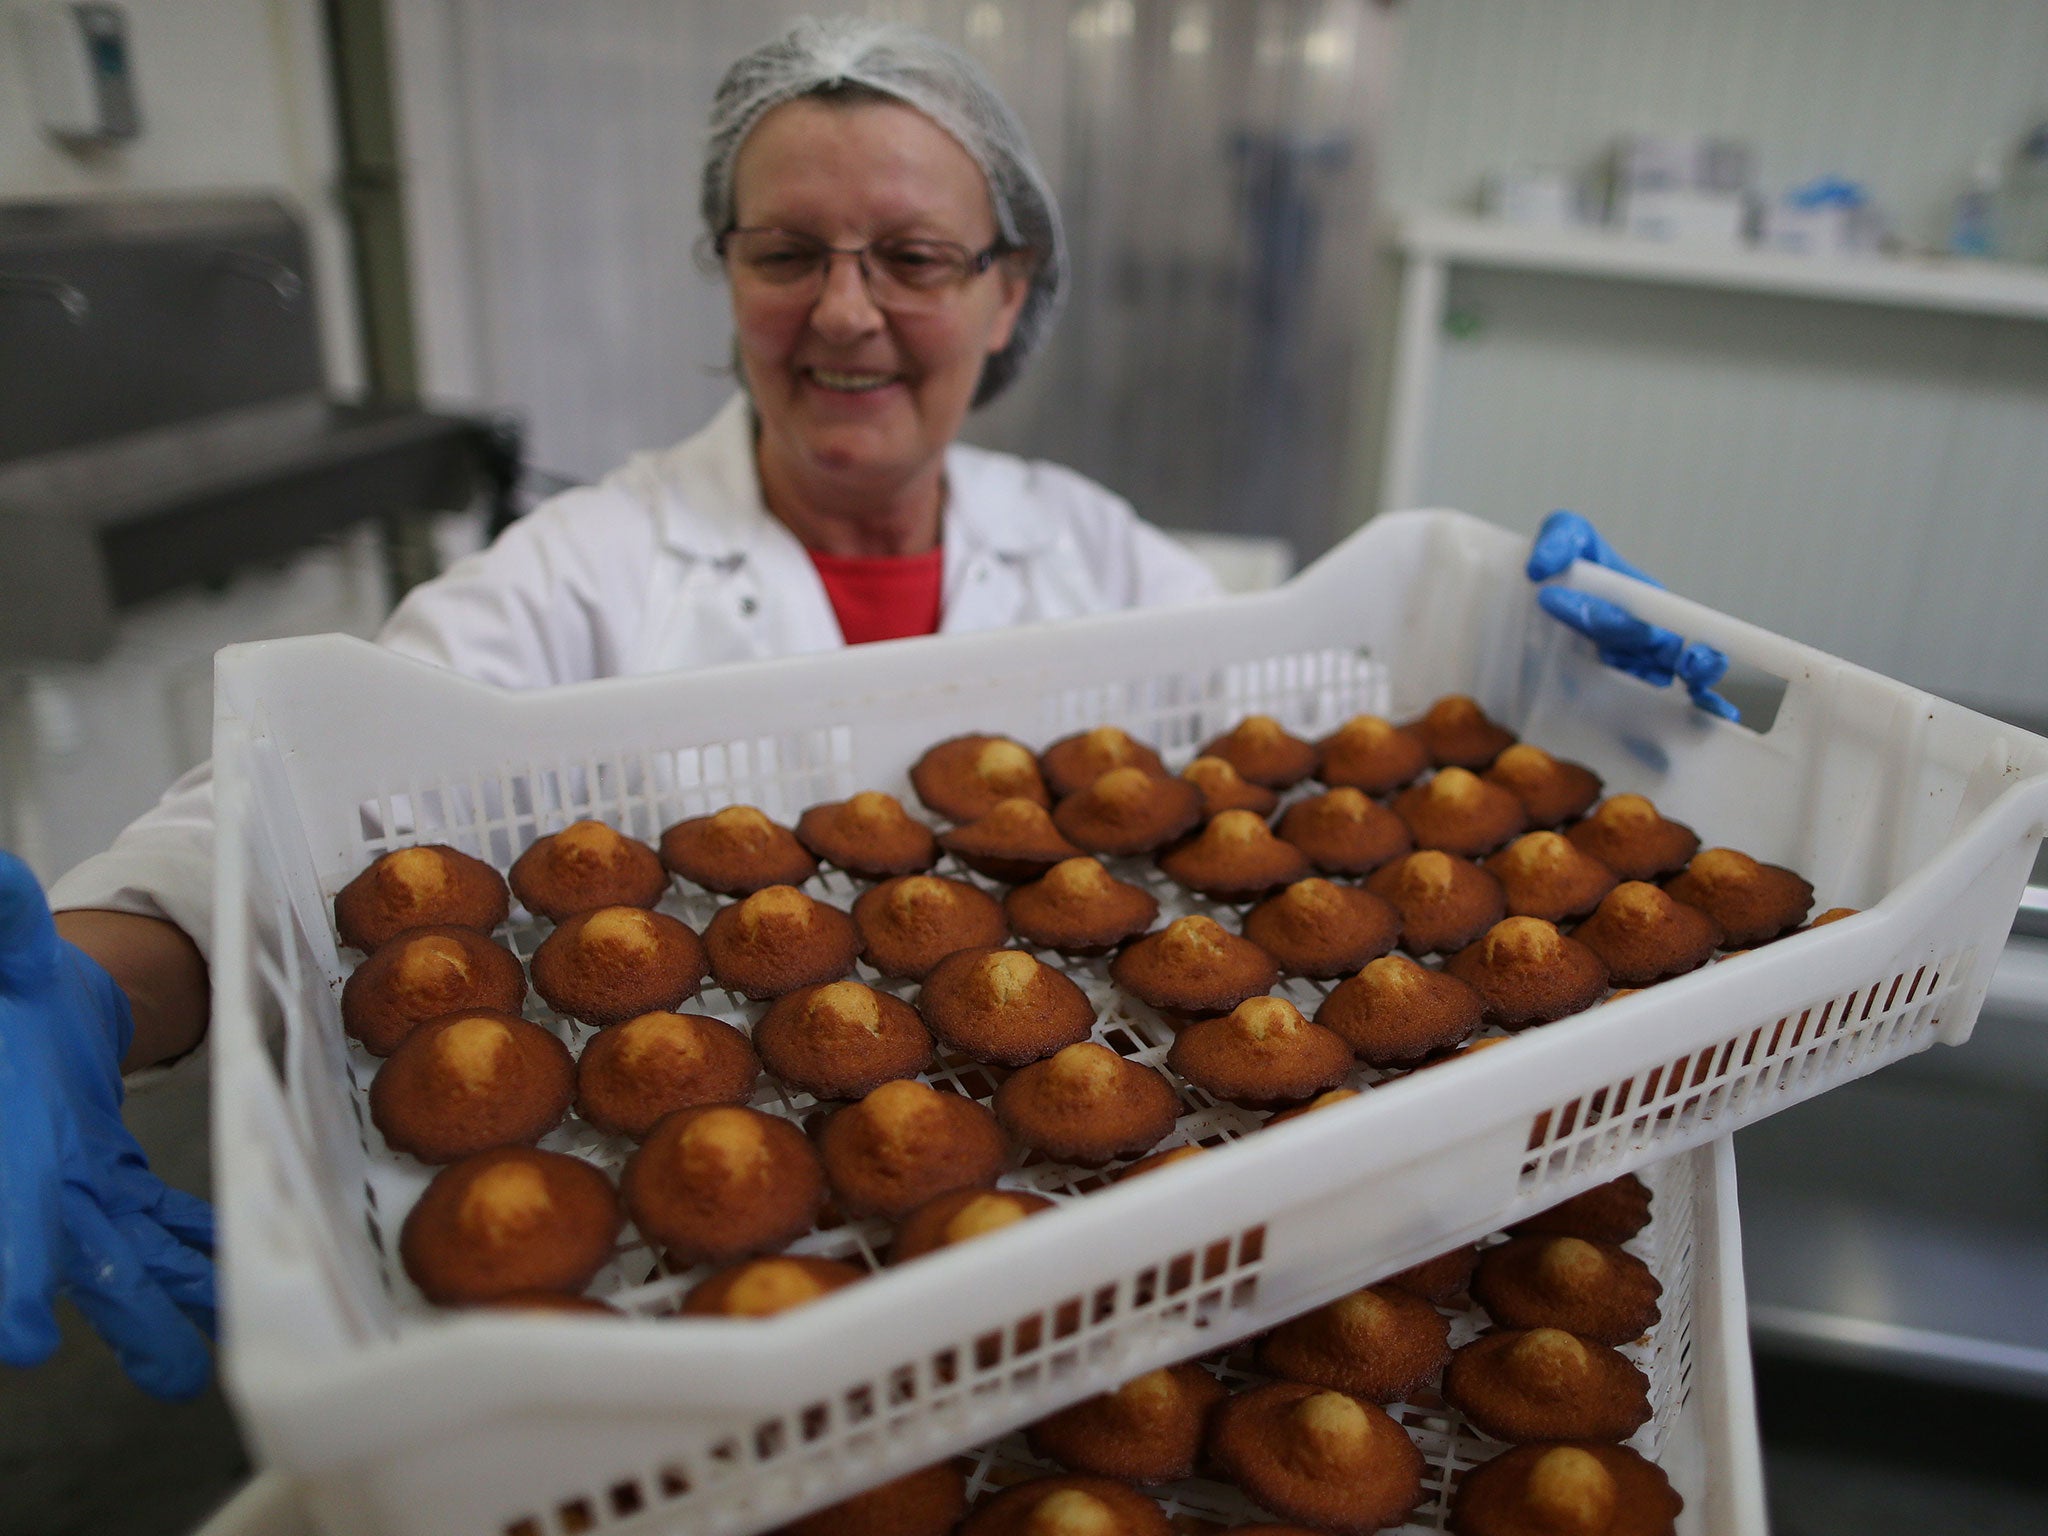 An employee of the Jeannette factory holds a plate of madeleines just after baking in the production plant in Demouville near Caen, northwestern France, on January 26, 2016.